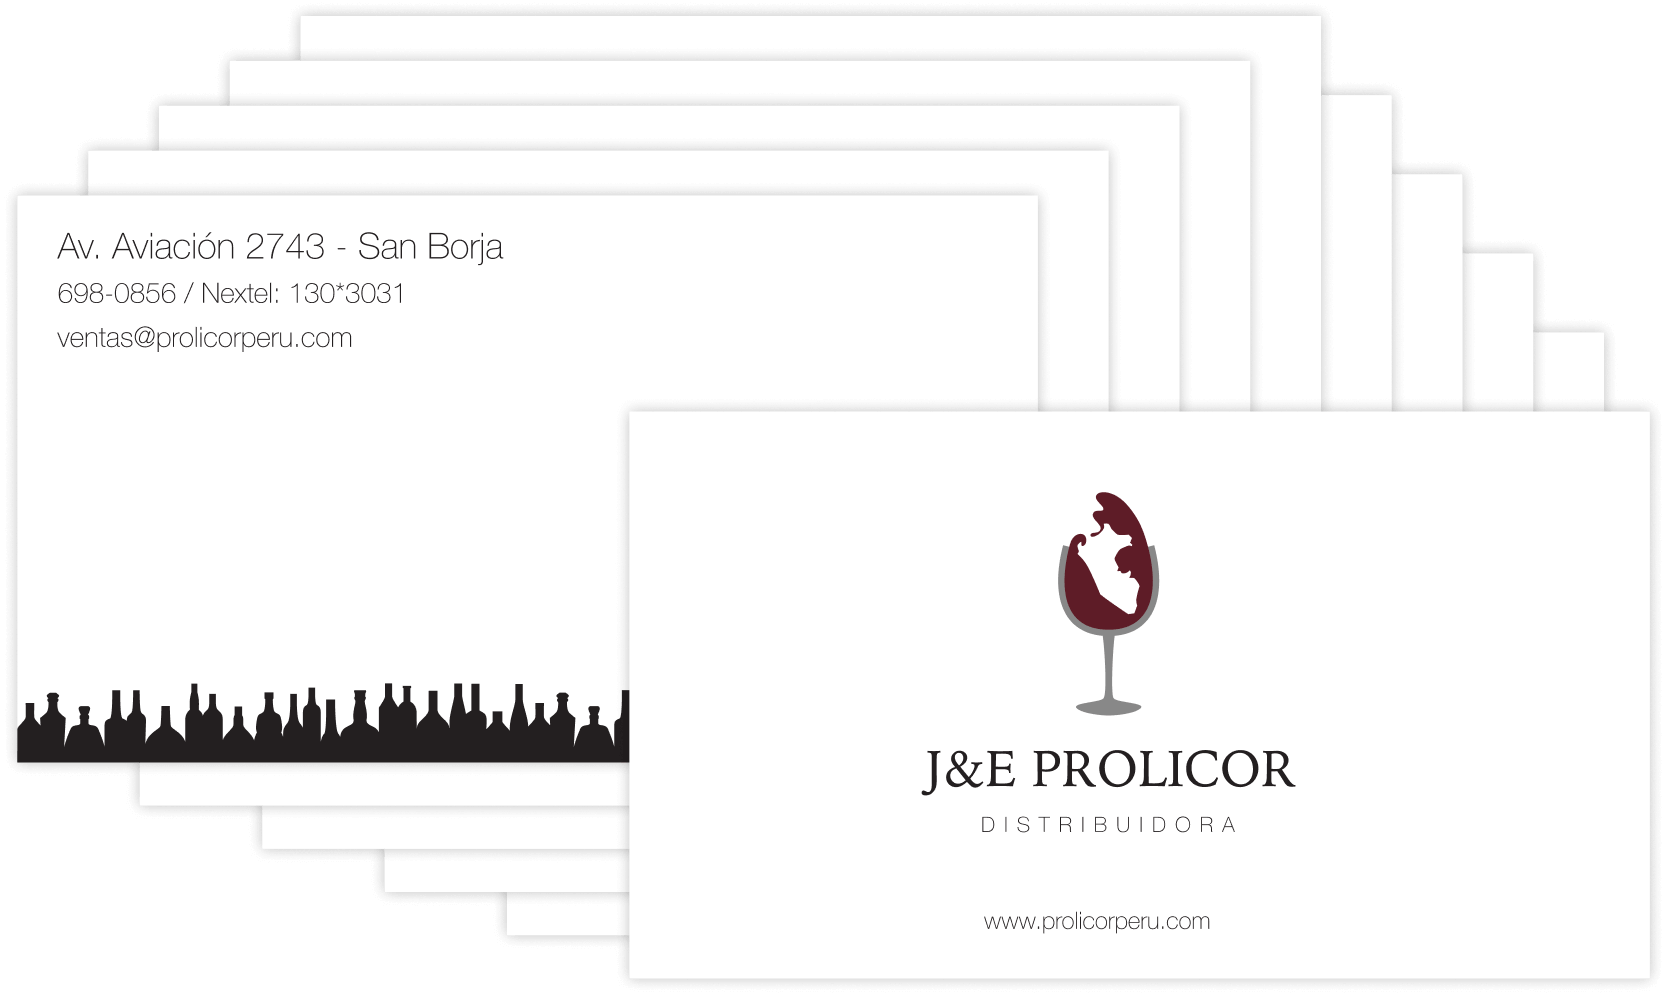 Prolicor's cards.